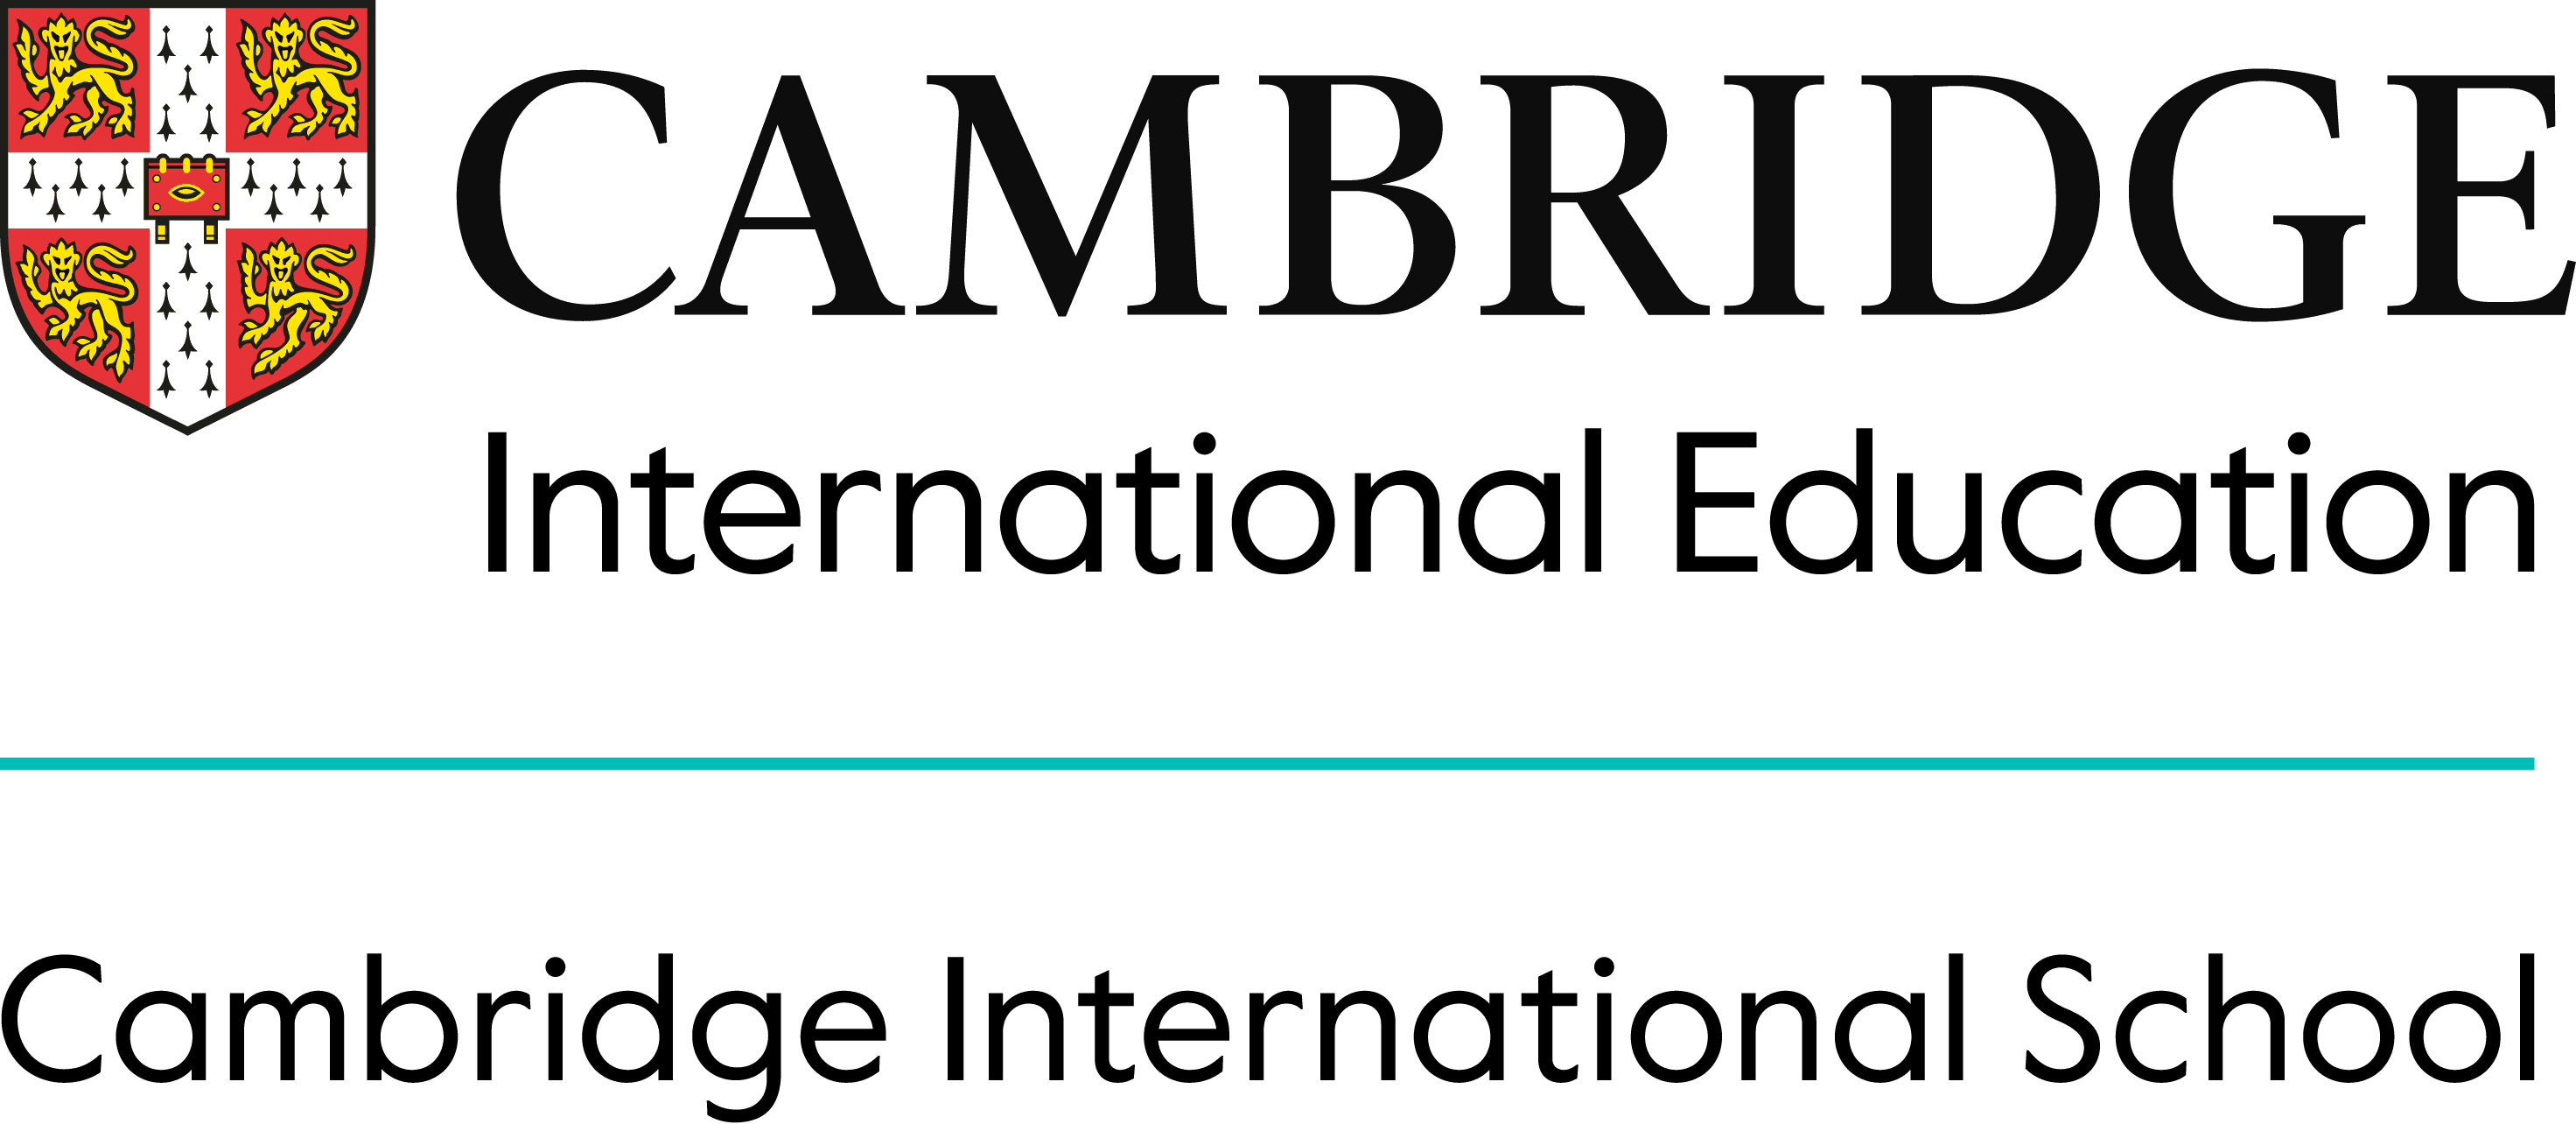 VAS is recognized as a Cambridge School by Cambridge Assessment International Education (CAIE). Students sit for Cambridge Checkpoints, IGCSE, and A Level within the formal curriculum of the school.